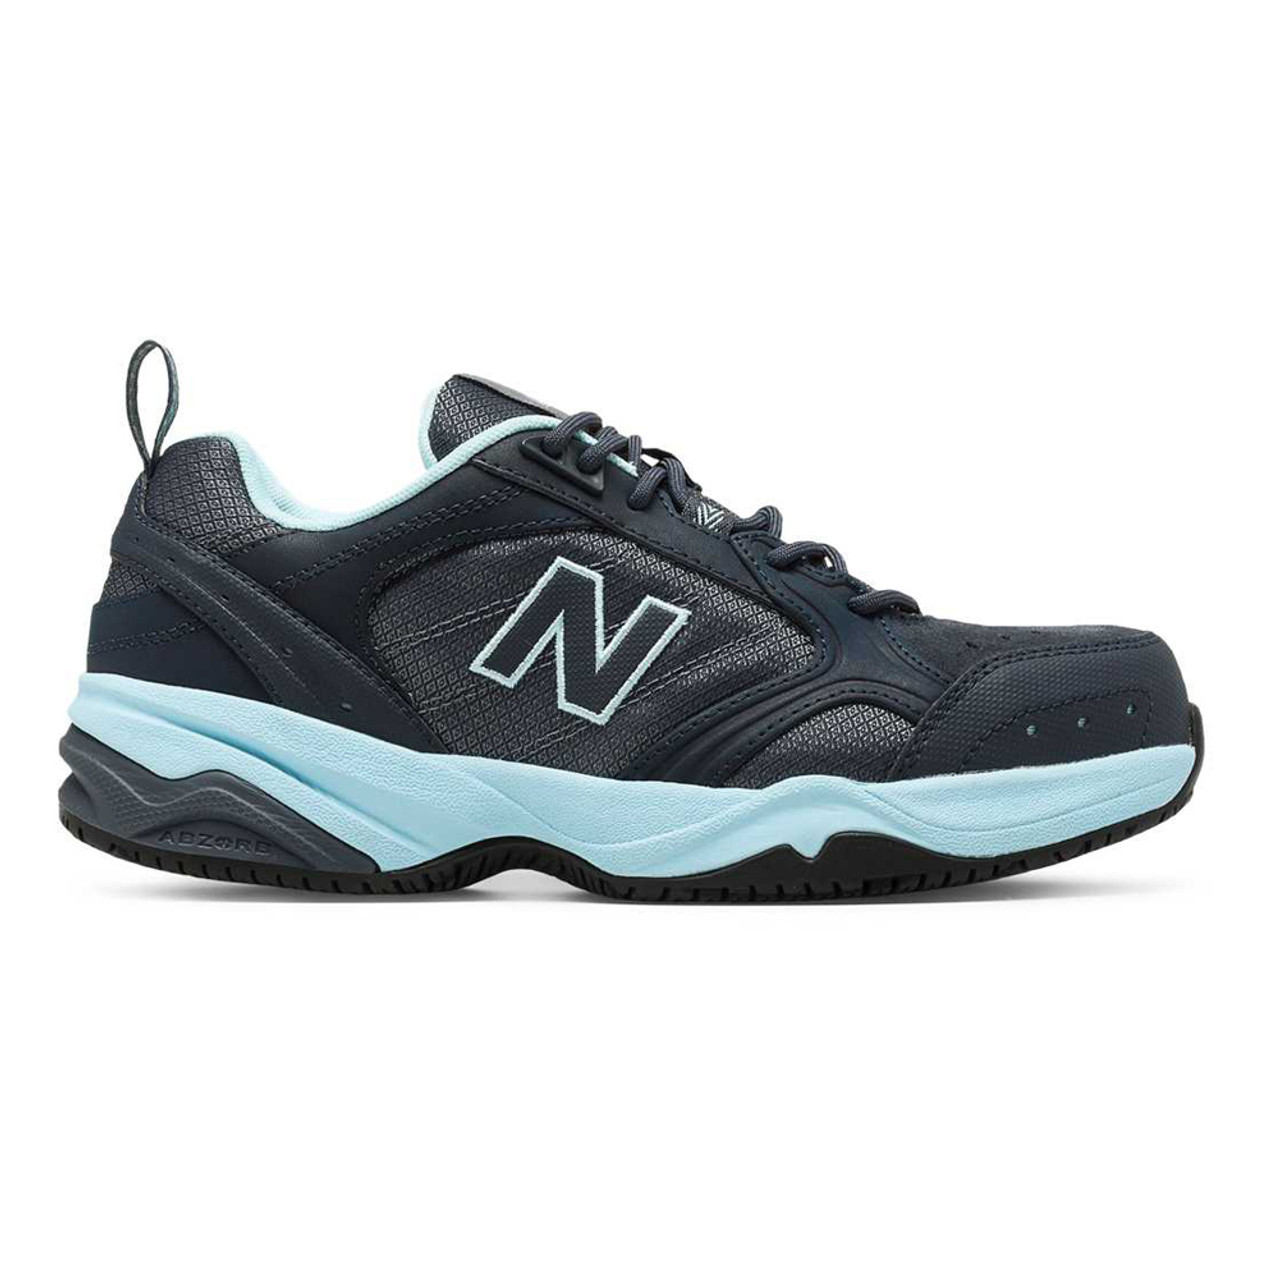 New Balance 627 Women's Athletic ESD Steel Safety Toe Work Shoe #WID627GP